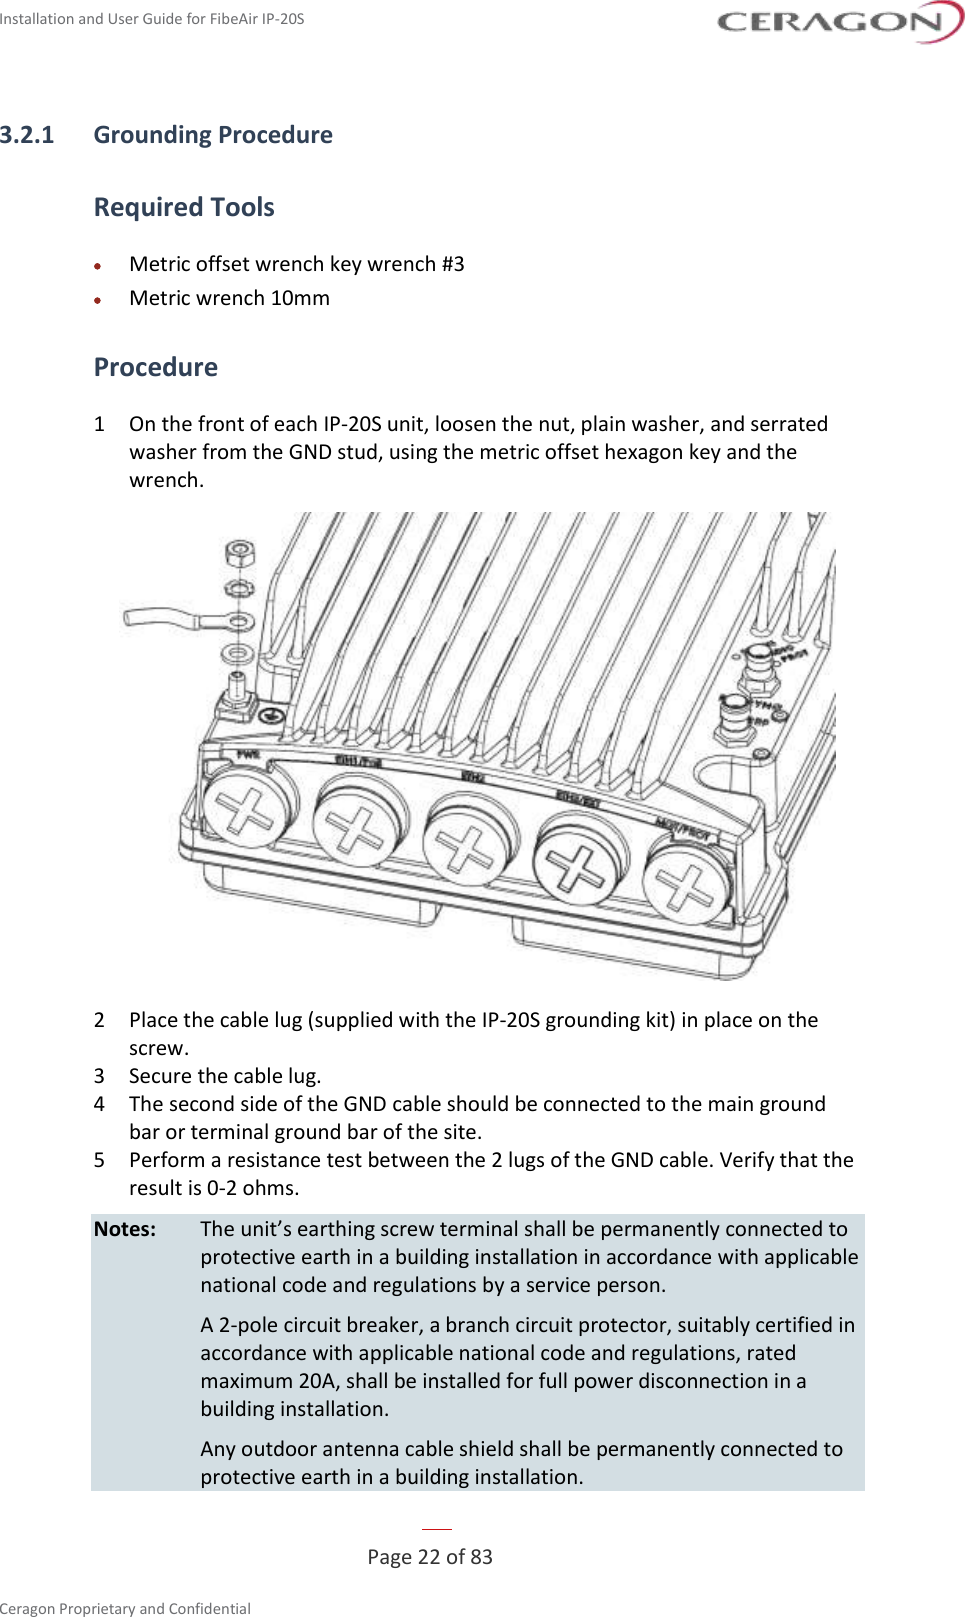 Installation and User Guide for FibeAir IP-20S   Page 22 of 83  Ceragon Proprietary and Confidential     3.2.1 Grounding Procedure Required Tools • Metric offset wrench key wrench #3 • Metric wrench 10mm Procedure 1  On the front of each IP-20S unit, loosen the nut, plain washer, and serrated washer from the GND stud, using the metric offset hexagon key and the wrench.  2  Place the cable lug (supplied with the IP-20S grounding kit) in place on the screw. 3  Secure the cable lug. 4  The second side of the GND cable should be connected to the main ground bar or terminal ground bar of the site. 5  Perform a resistance test between the 2 lugs of the GND cable. Verify that the result is 0-2 ohms. Notes: The unit’s earthing screw terminal shall be permanently connected to protective earth in a building installation in accordance with applicable national code and regulations by a service person.   A 2-pole circuit breaker, a branch circuit protector, suitably certified in accordance with applicable national code and regulations, rated maximum 20A, shall be installed for full power disconnection in a building installation.   Any outdoor antenna cable shield shall be permanently connected to protective earth in a building installation. 